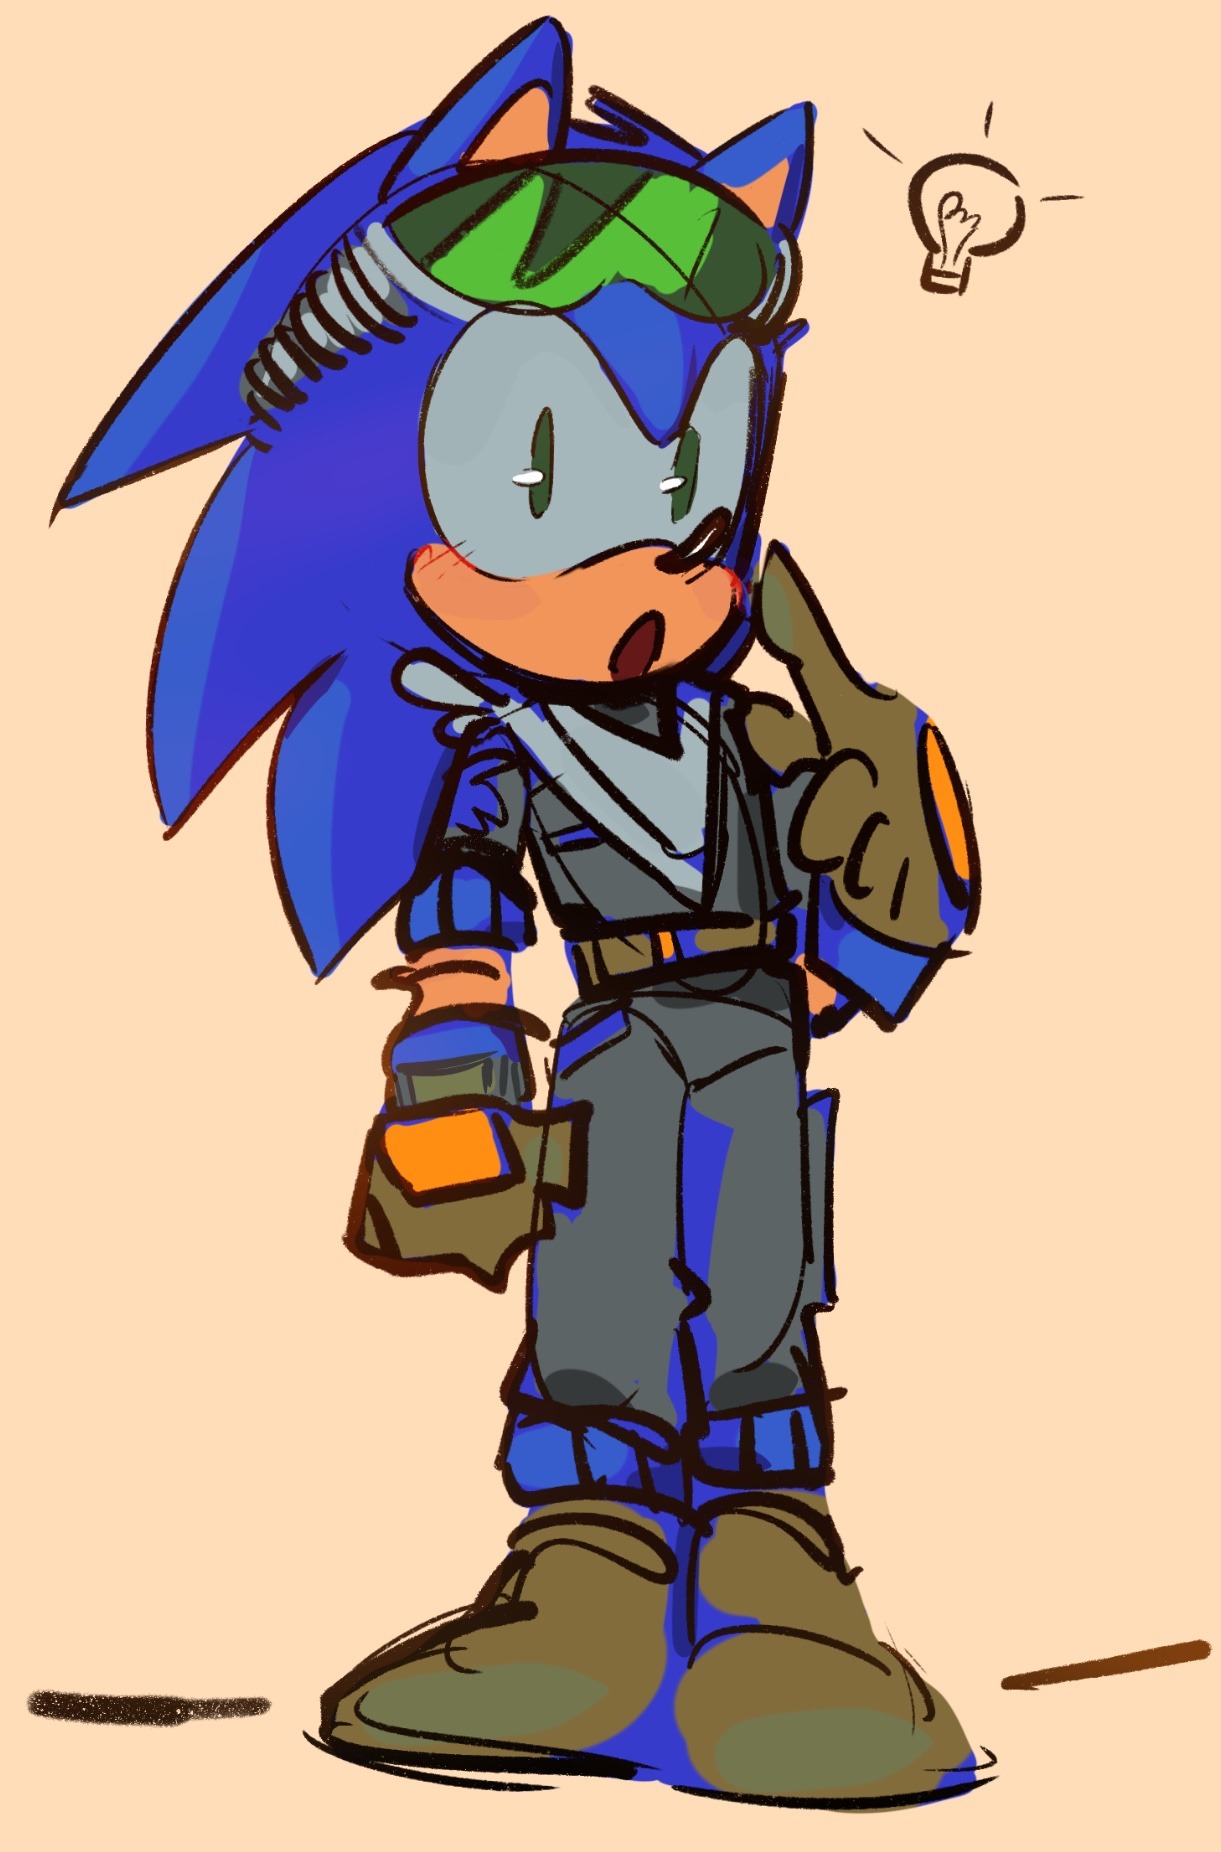 You.Halfwit — How'd Sonic and Shadow meet in the mechanic